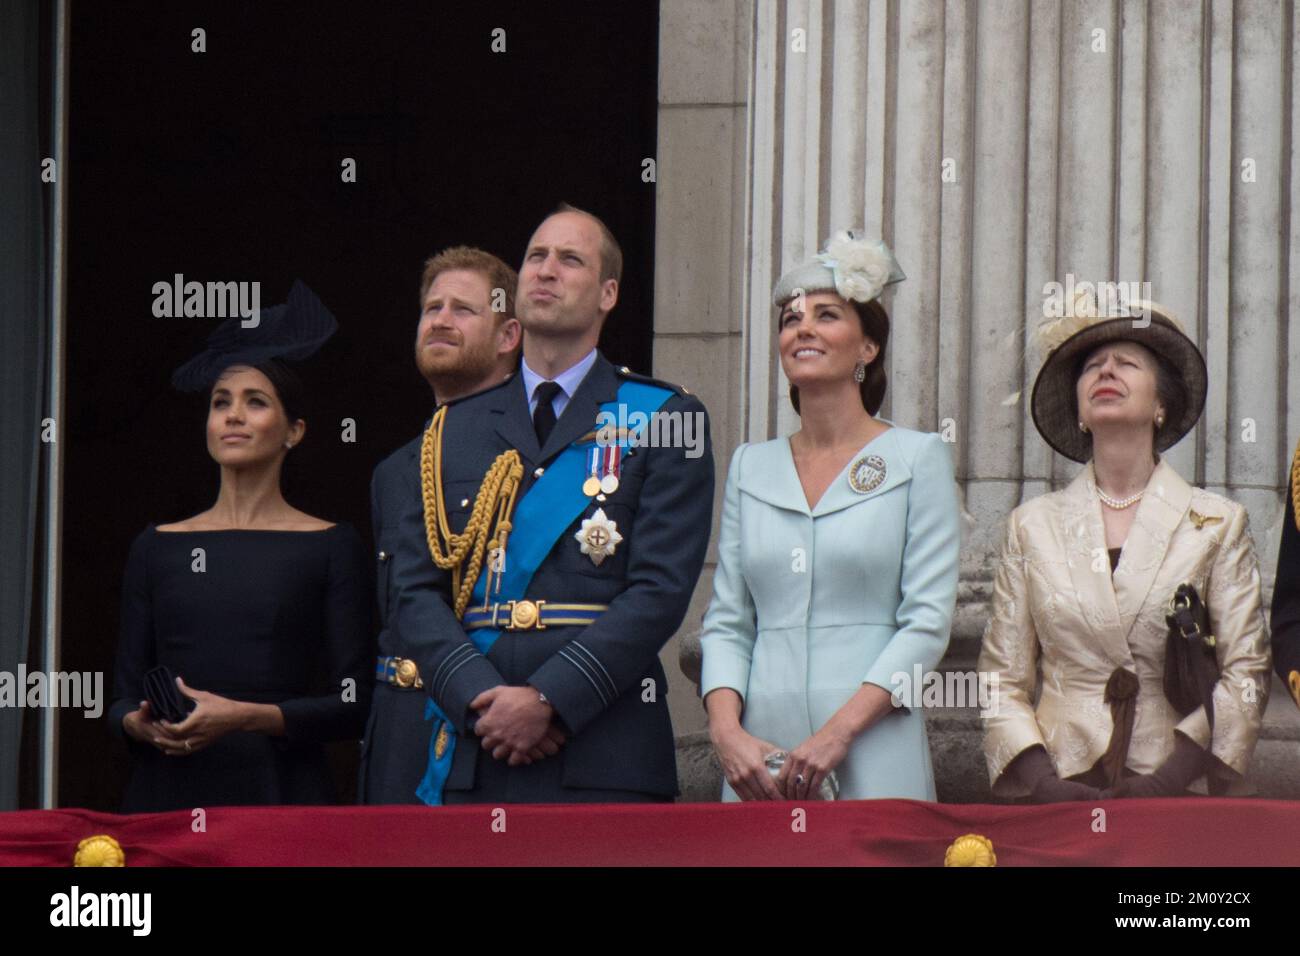 Meghan, Harry, William and Kate on the Balcony at Buckingham Palace ...